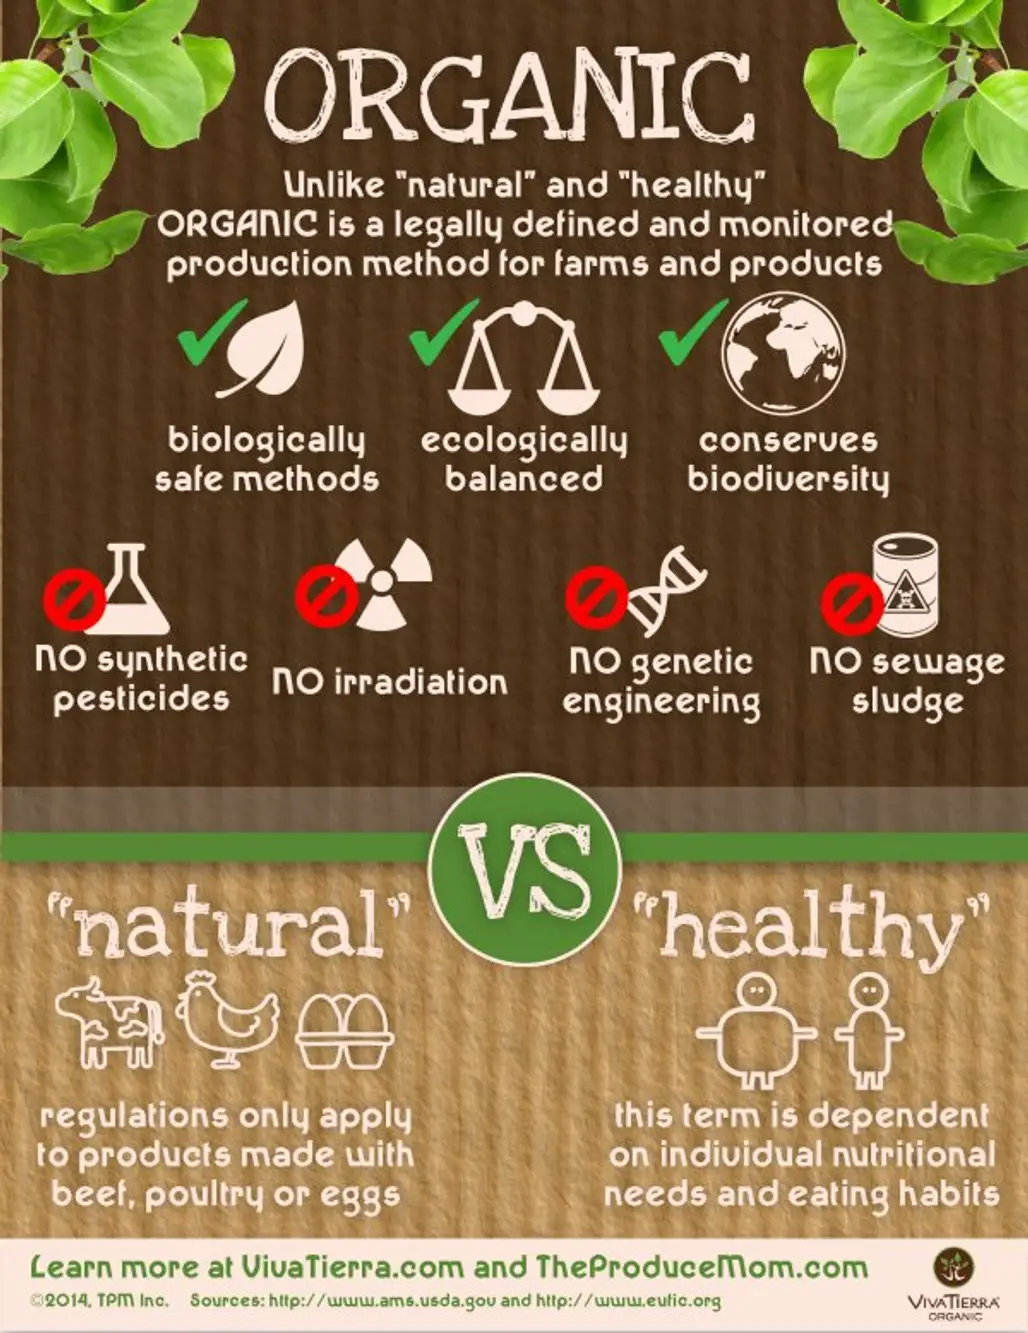 What Does Organic Really Mean?